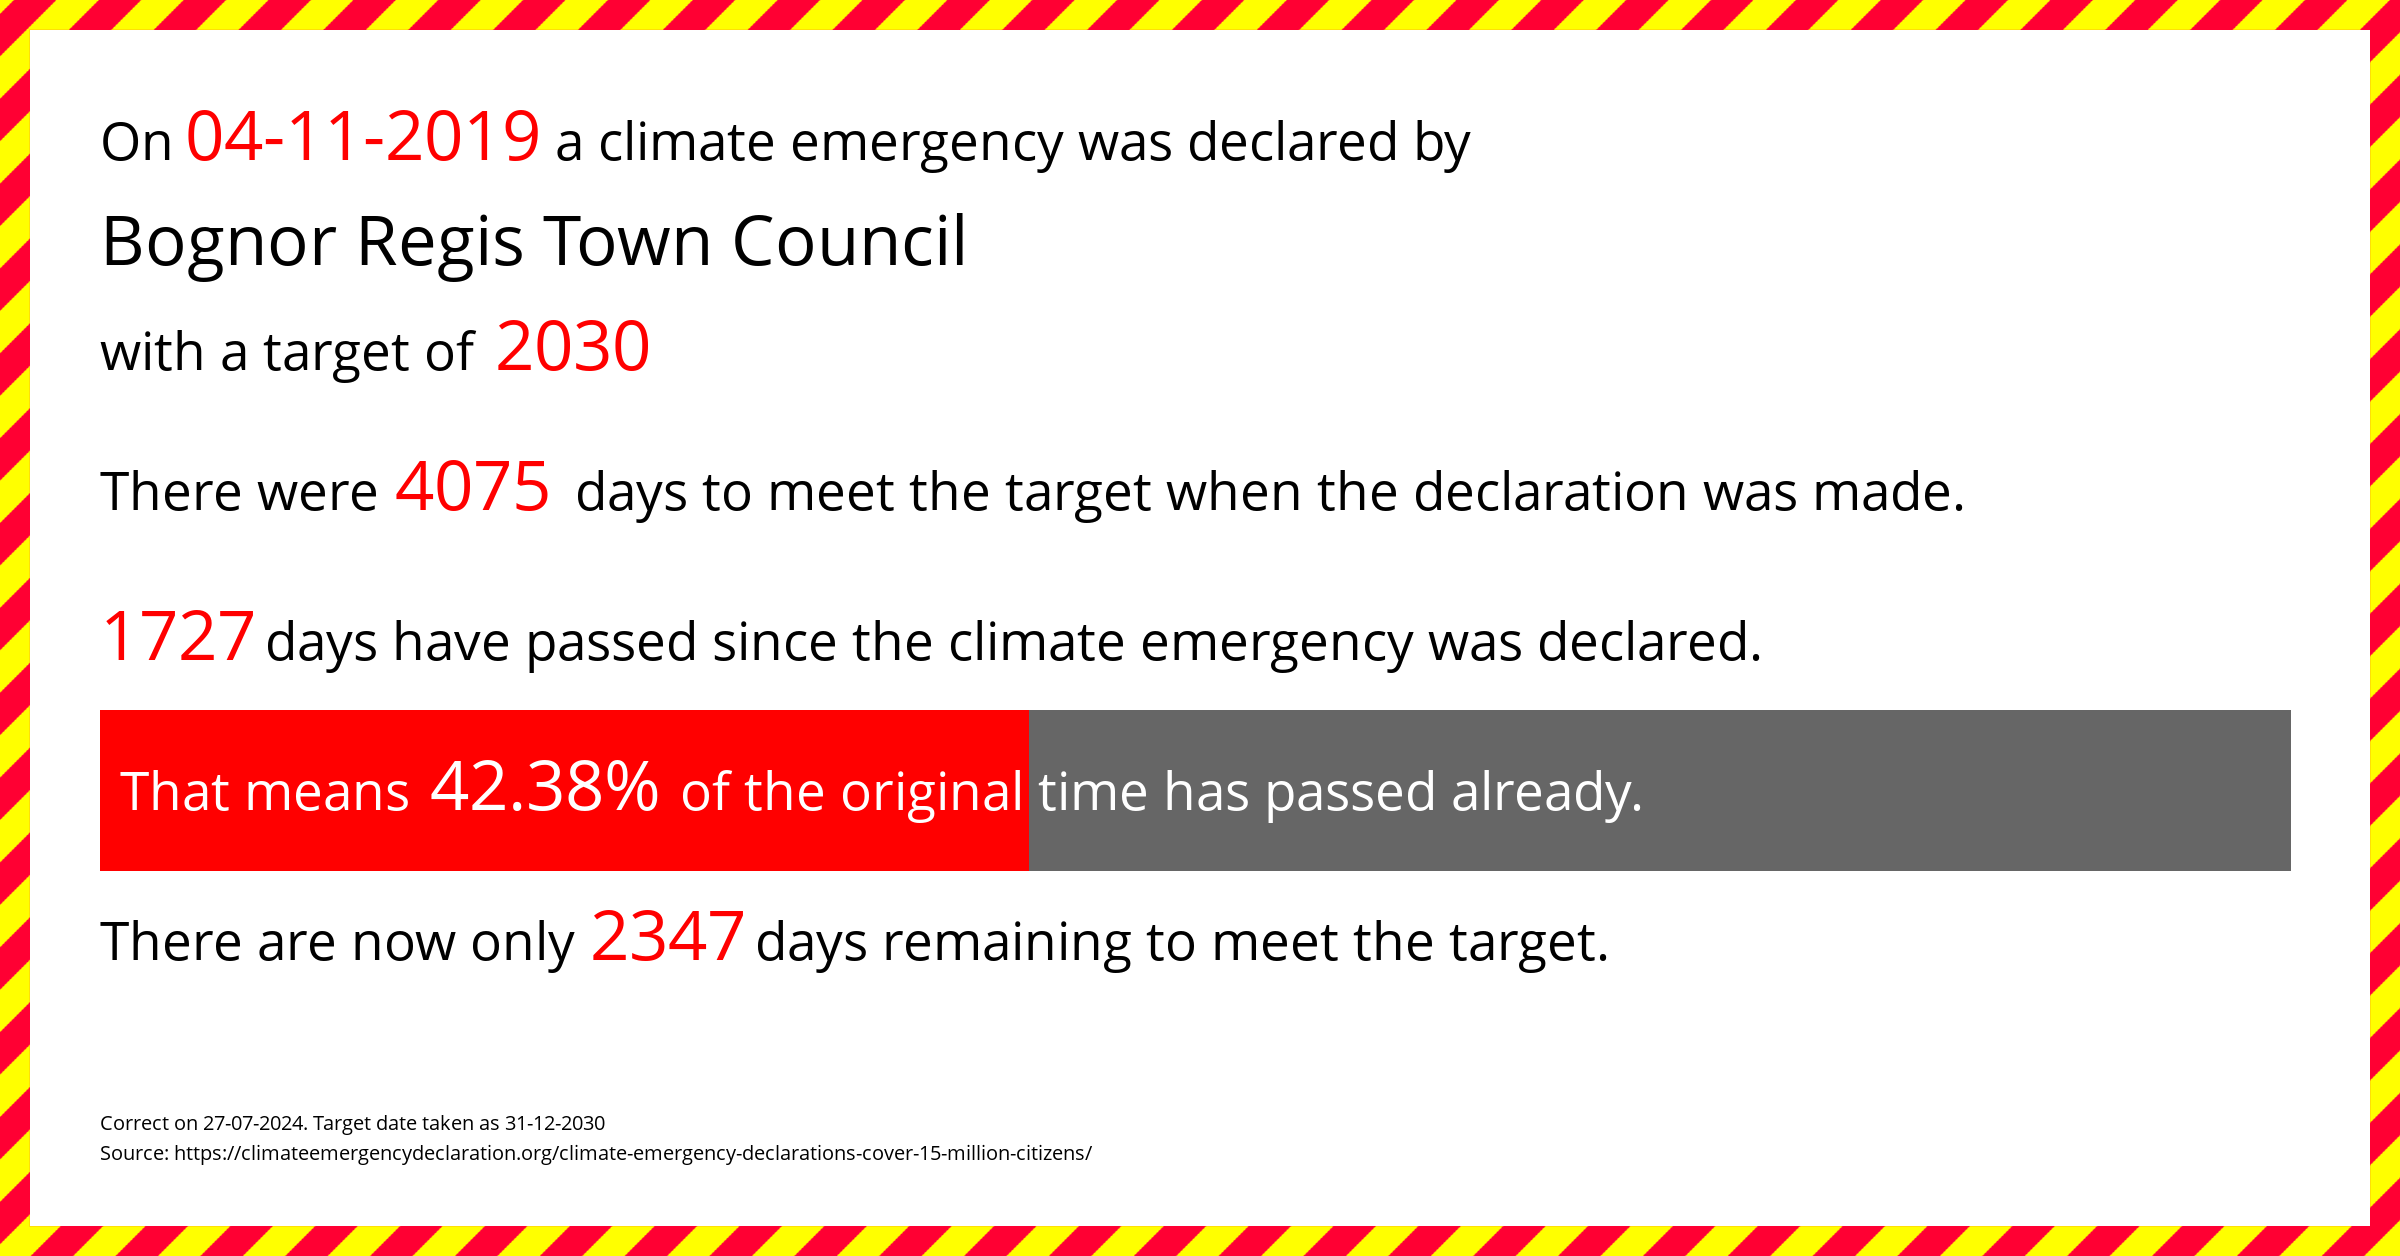 Bognor Regis Town Council declared a Climate emergency on Monday 4th November 2019, with a target of 2030.